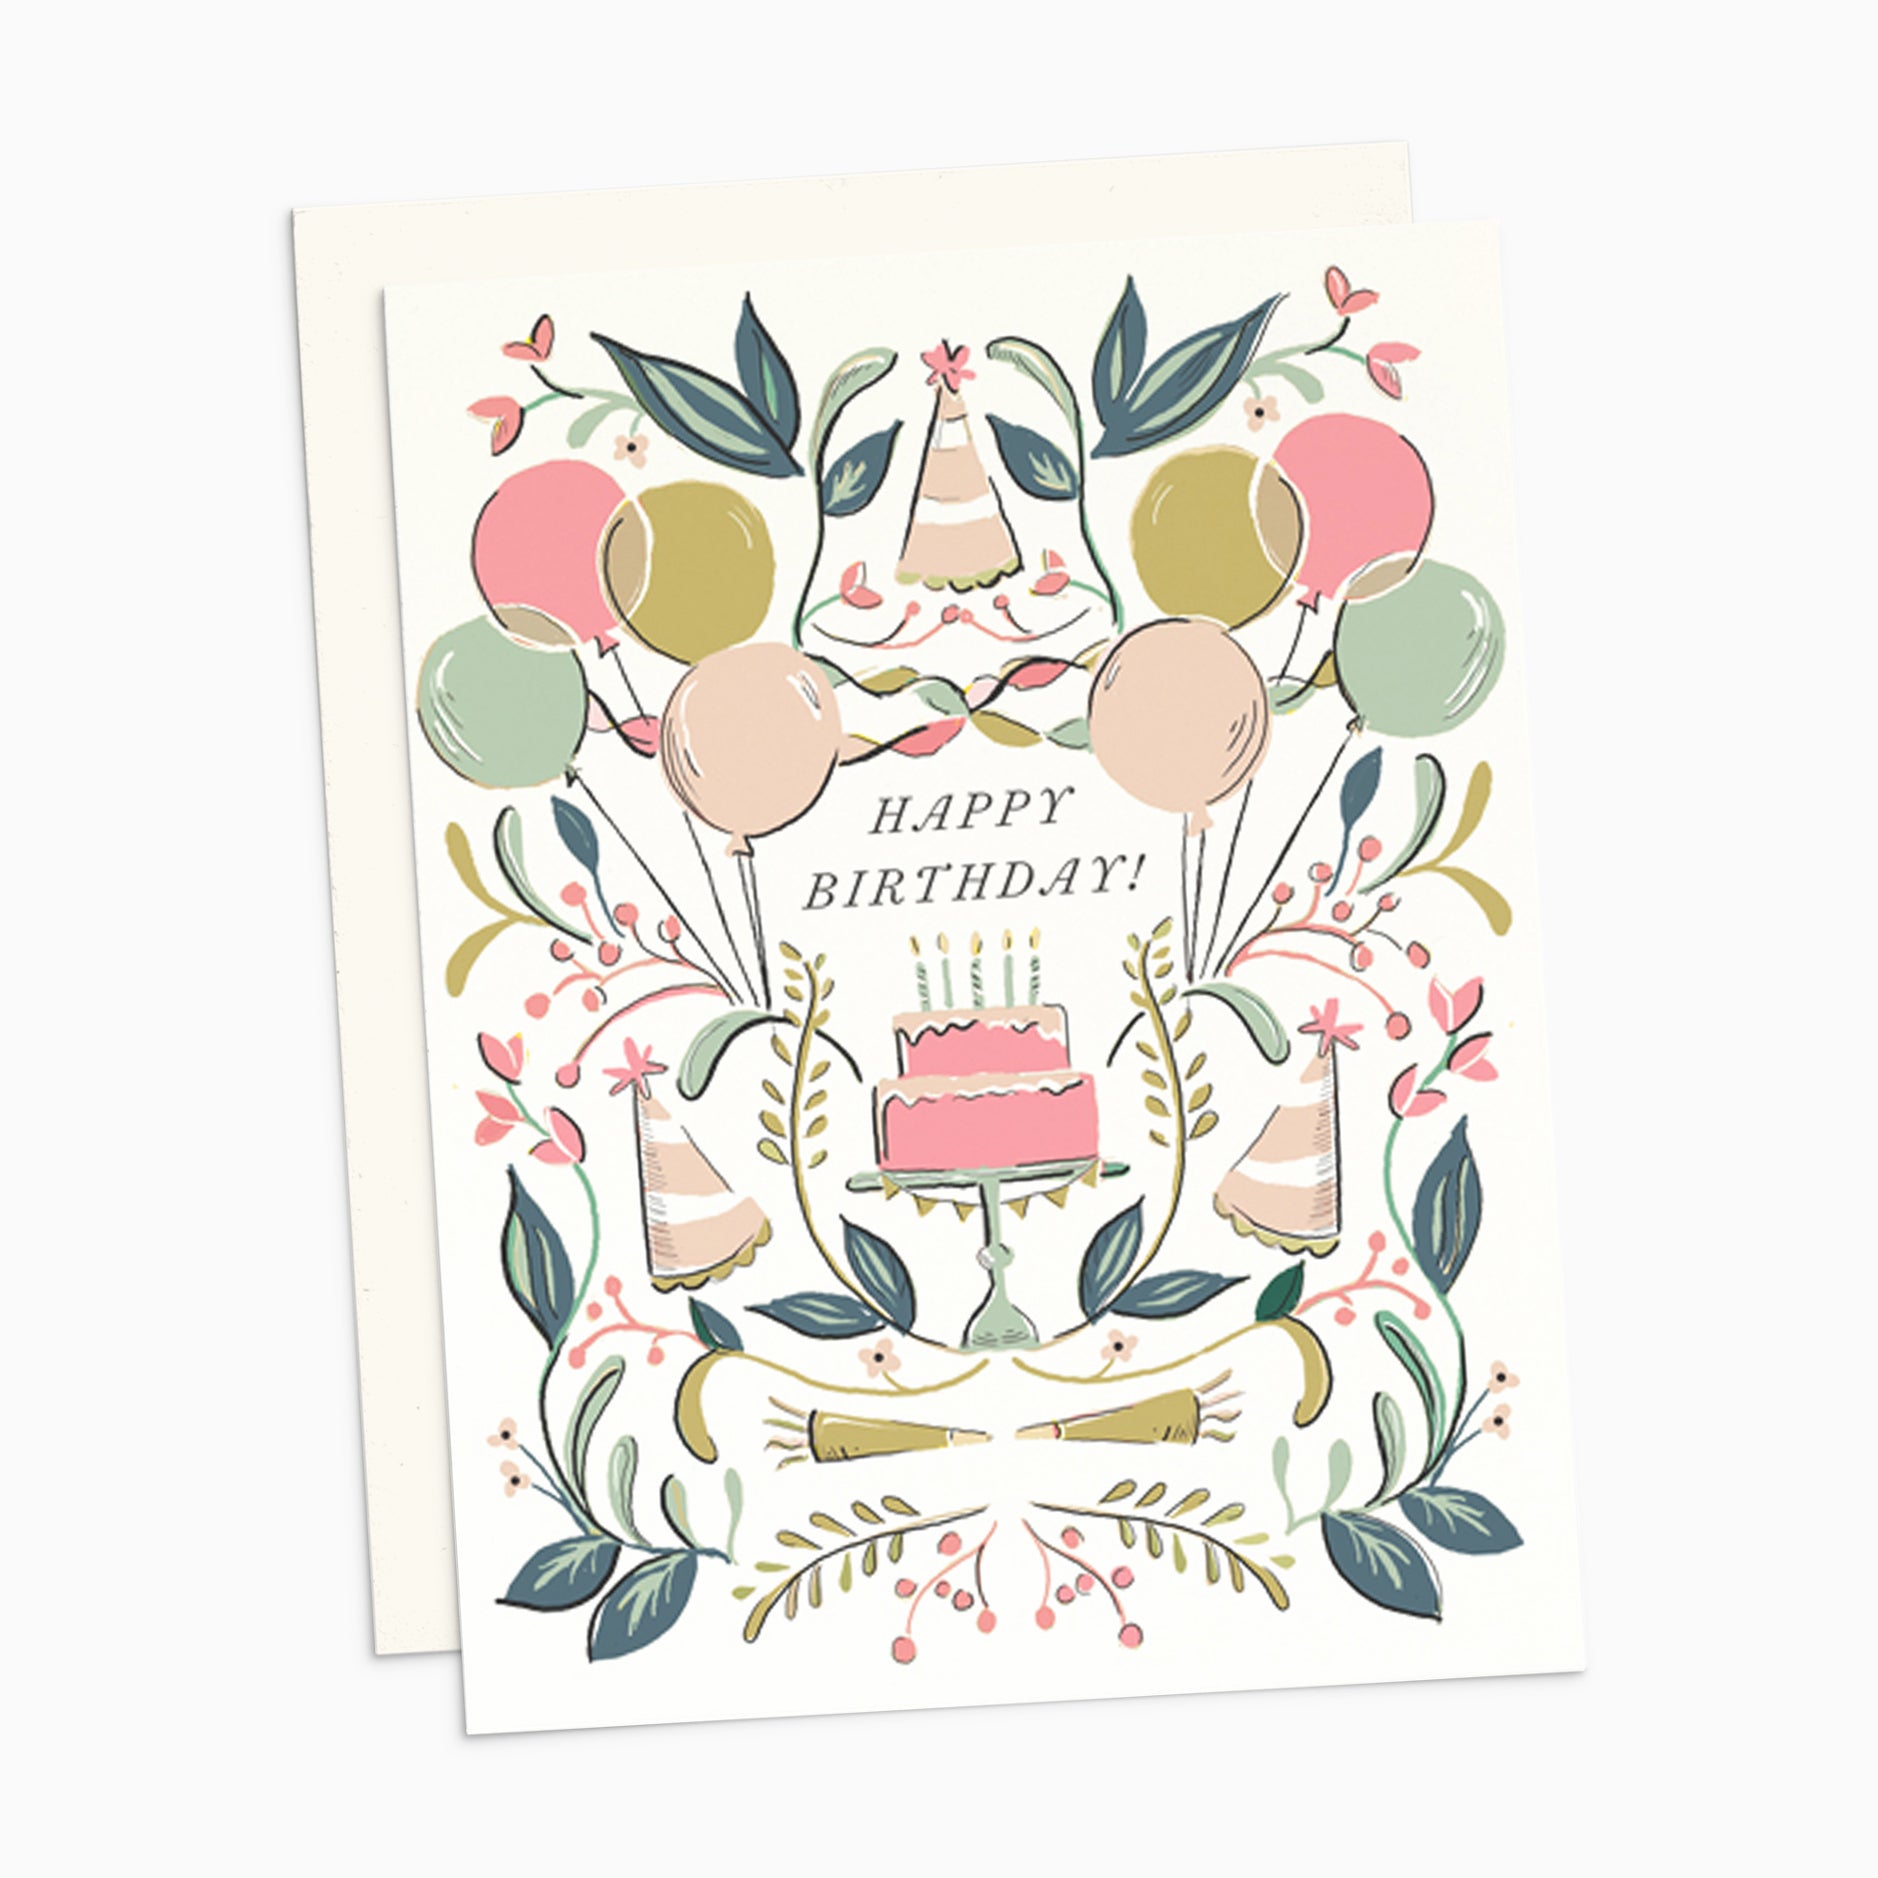 Illustrated birthday card on warm white premium cardstock, featuring a pink birthday cake surrounded by balloons, floral motifs, and party hats.